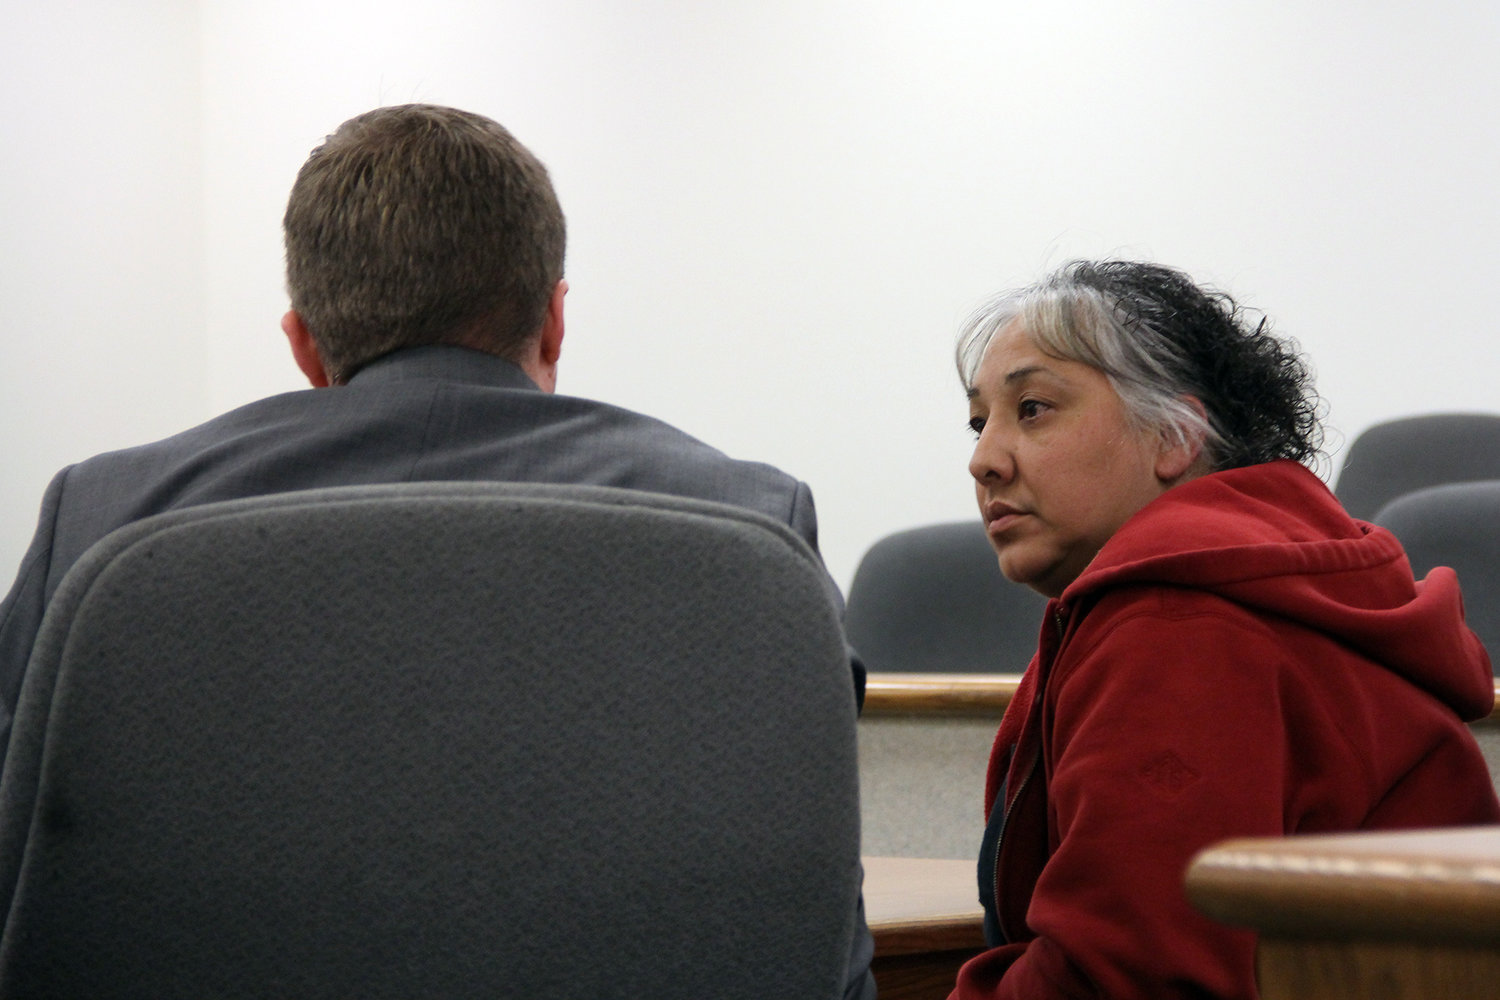 Rosemary Valderas Valencia, 44, of Tacoma, appears in Lewis County Superior Court Wednesday in Chehalis. Valencia was sentenced to 25 months in prison for three courts of second-degree organized retail theft involving three juveniles at Centralia Factory Outlets.